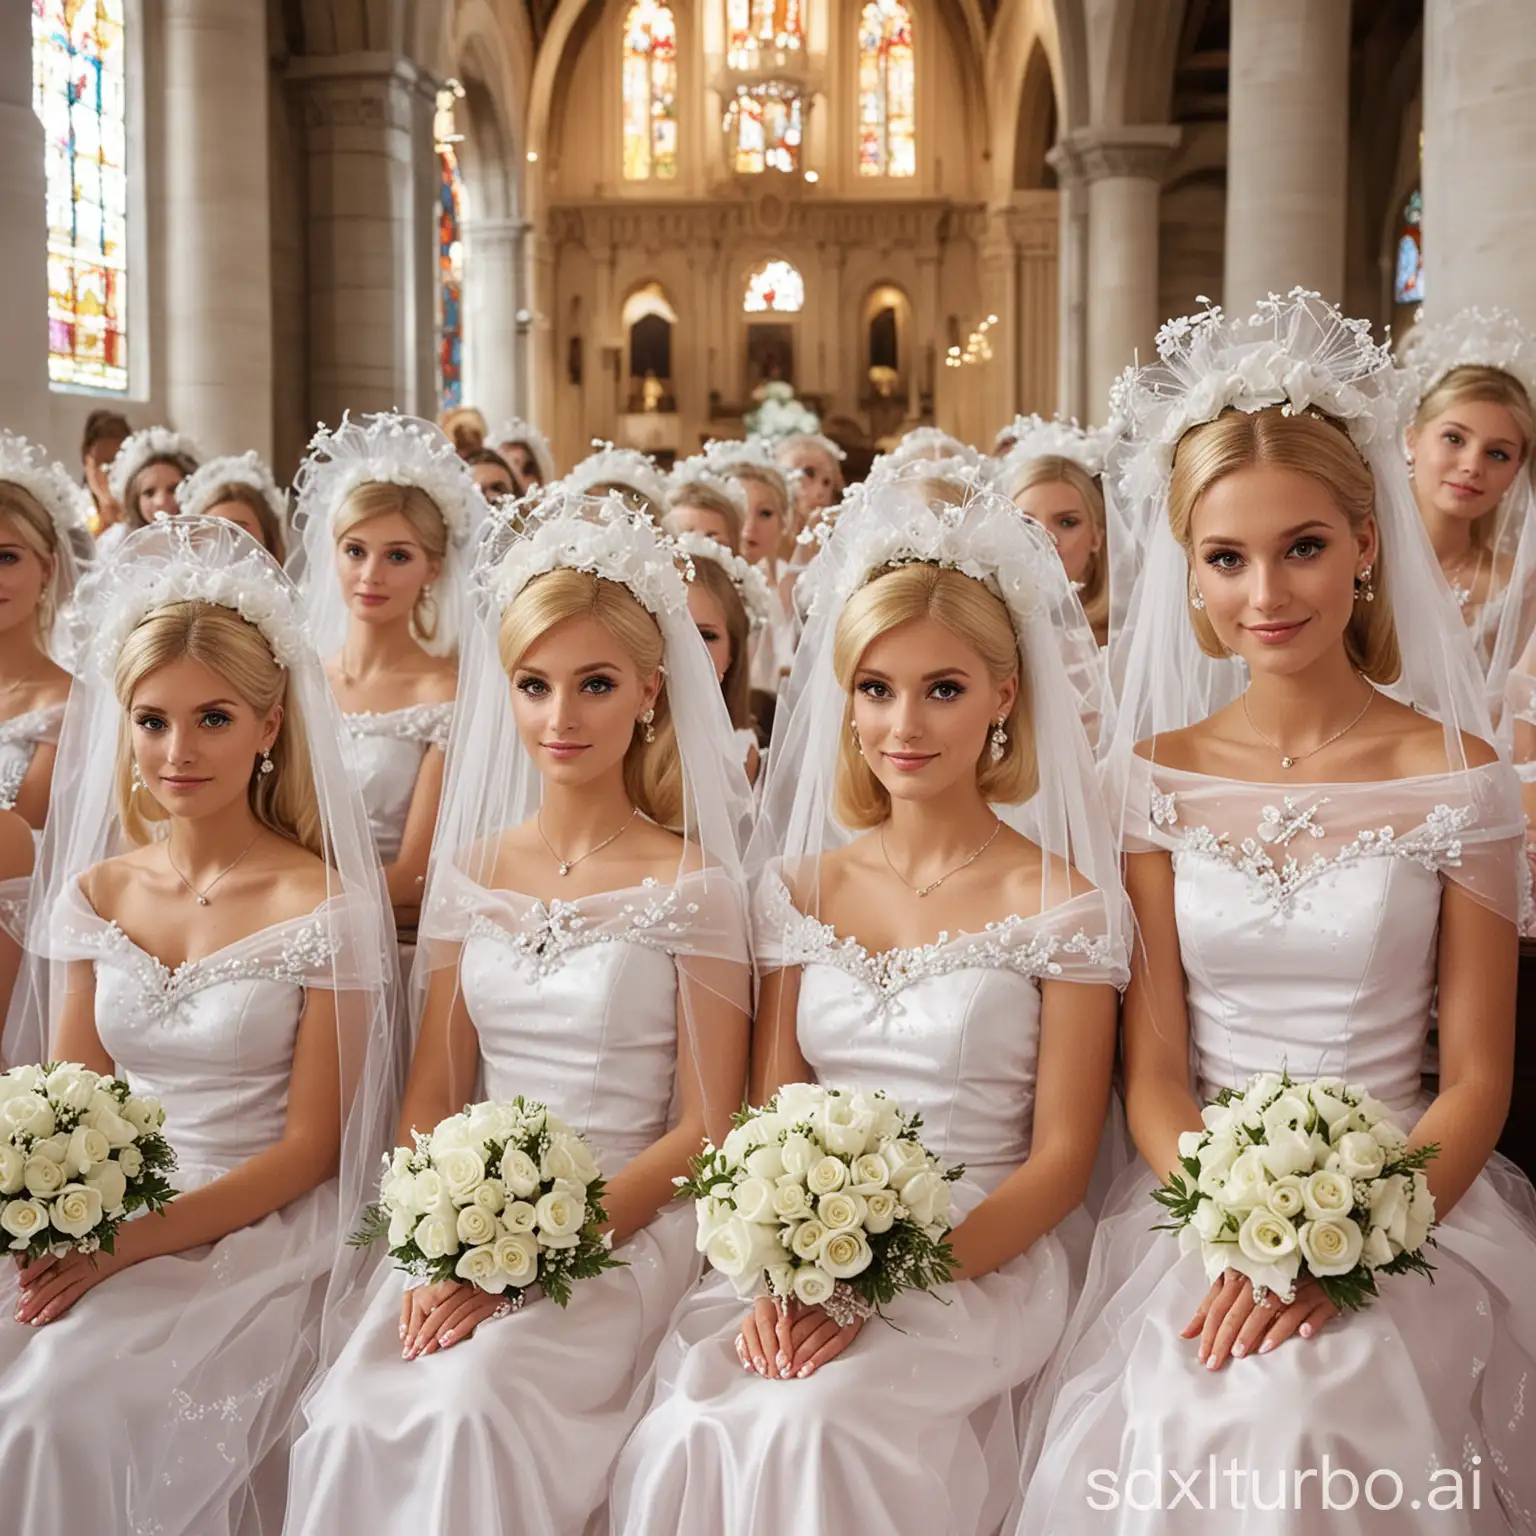 Val-Marchiori-and-Her-Barbie-Bride-Clones-Gathered-in-Church